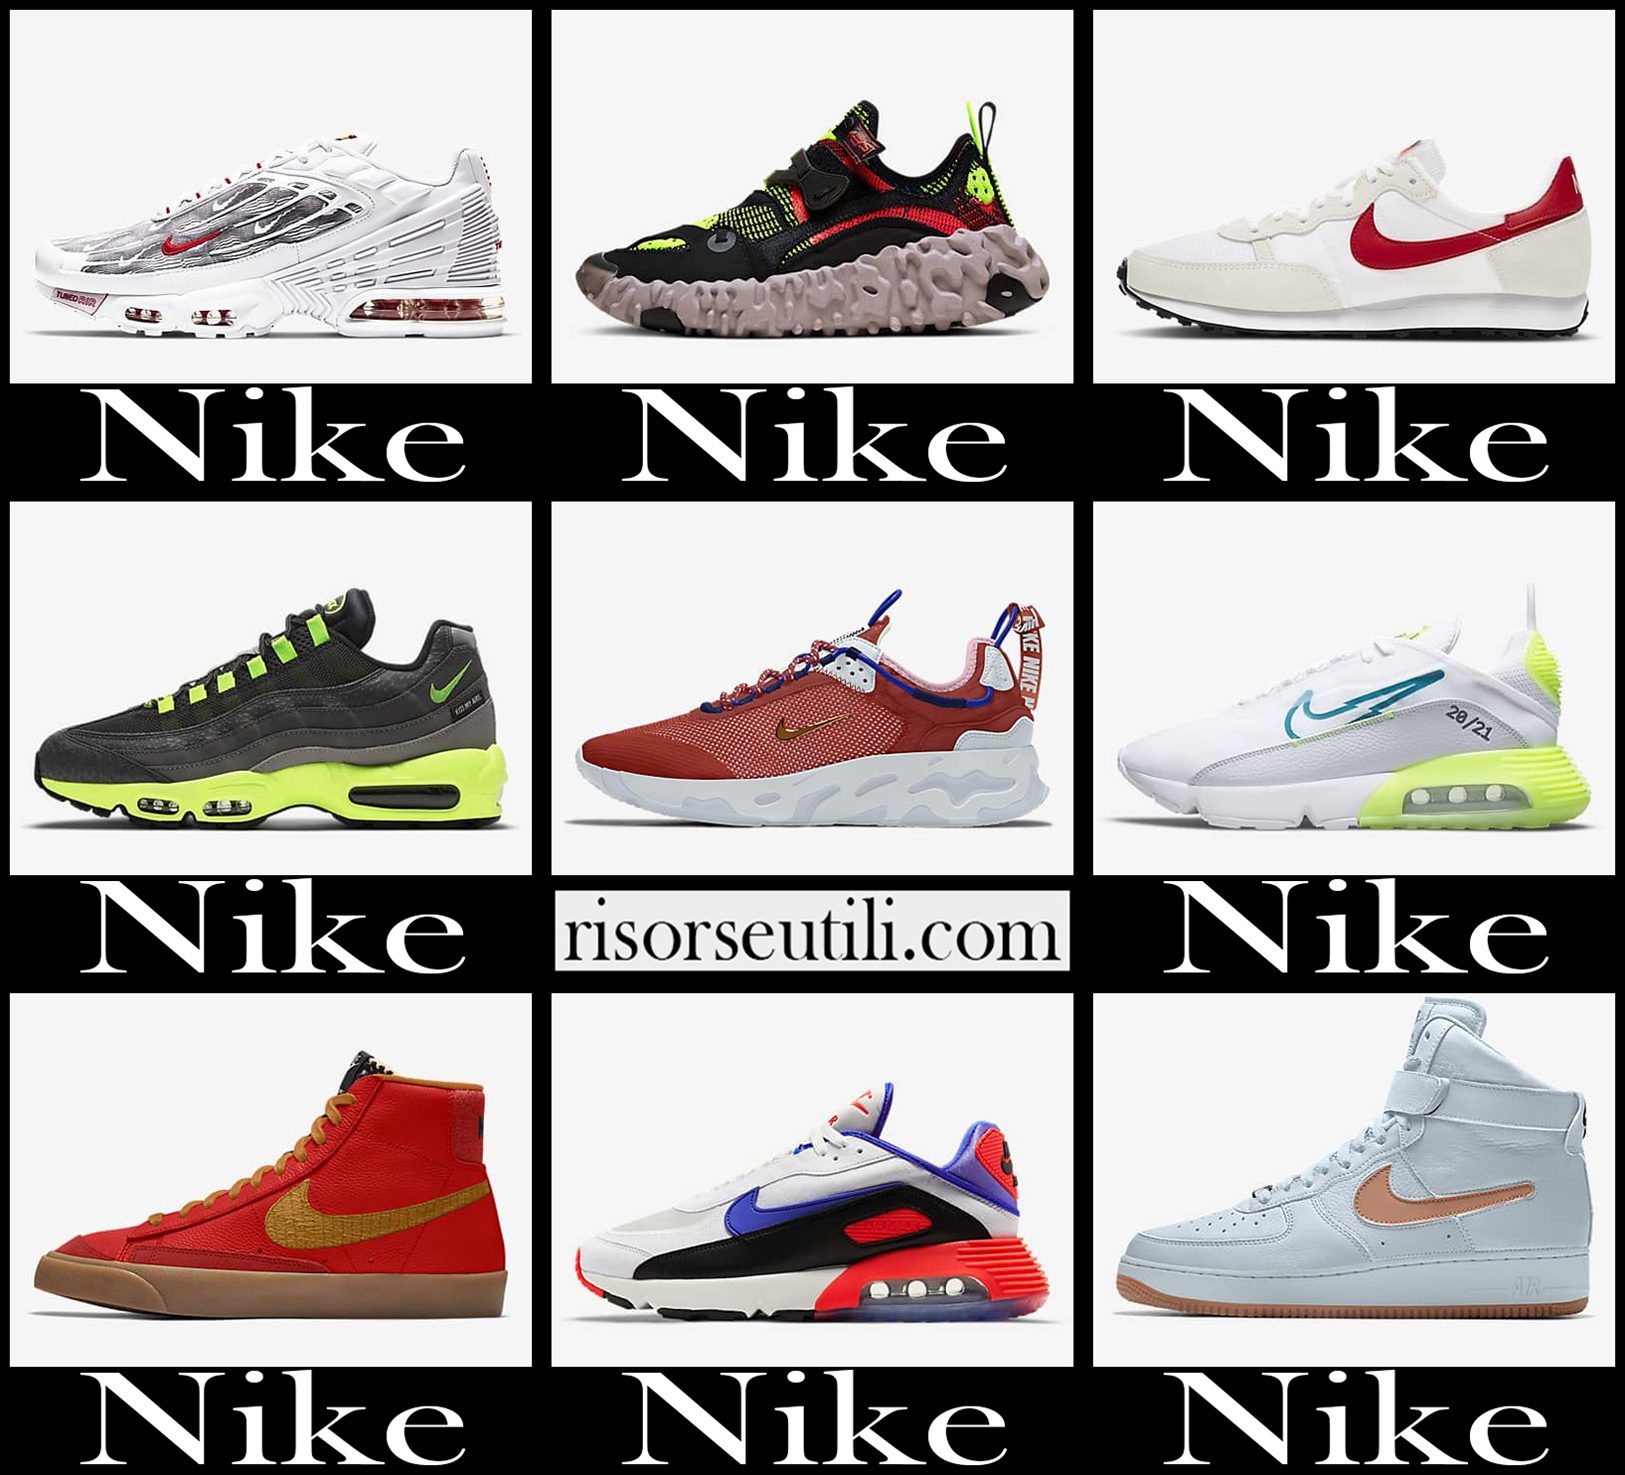 Sneakers Nike fall winter 2017 2018 new arrivals for women.